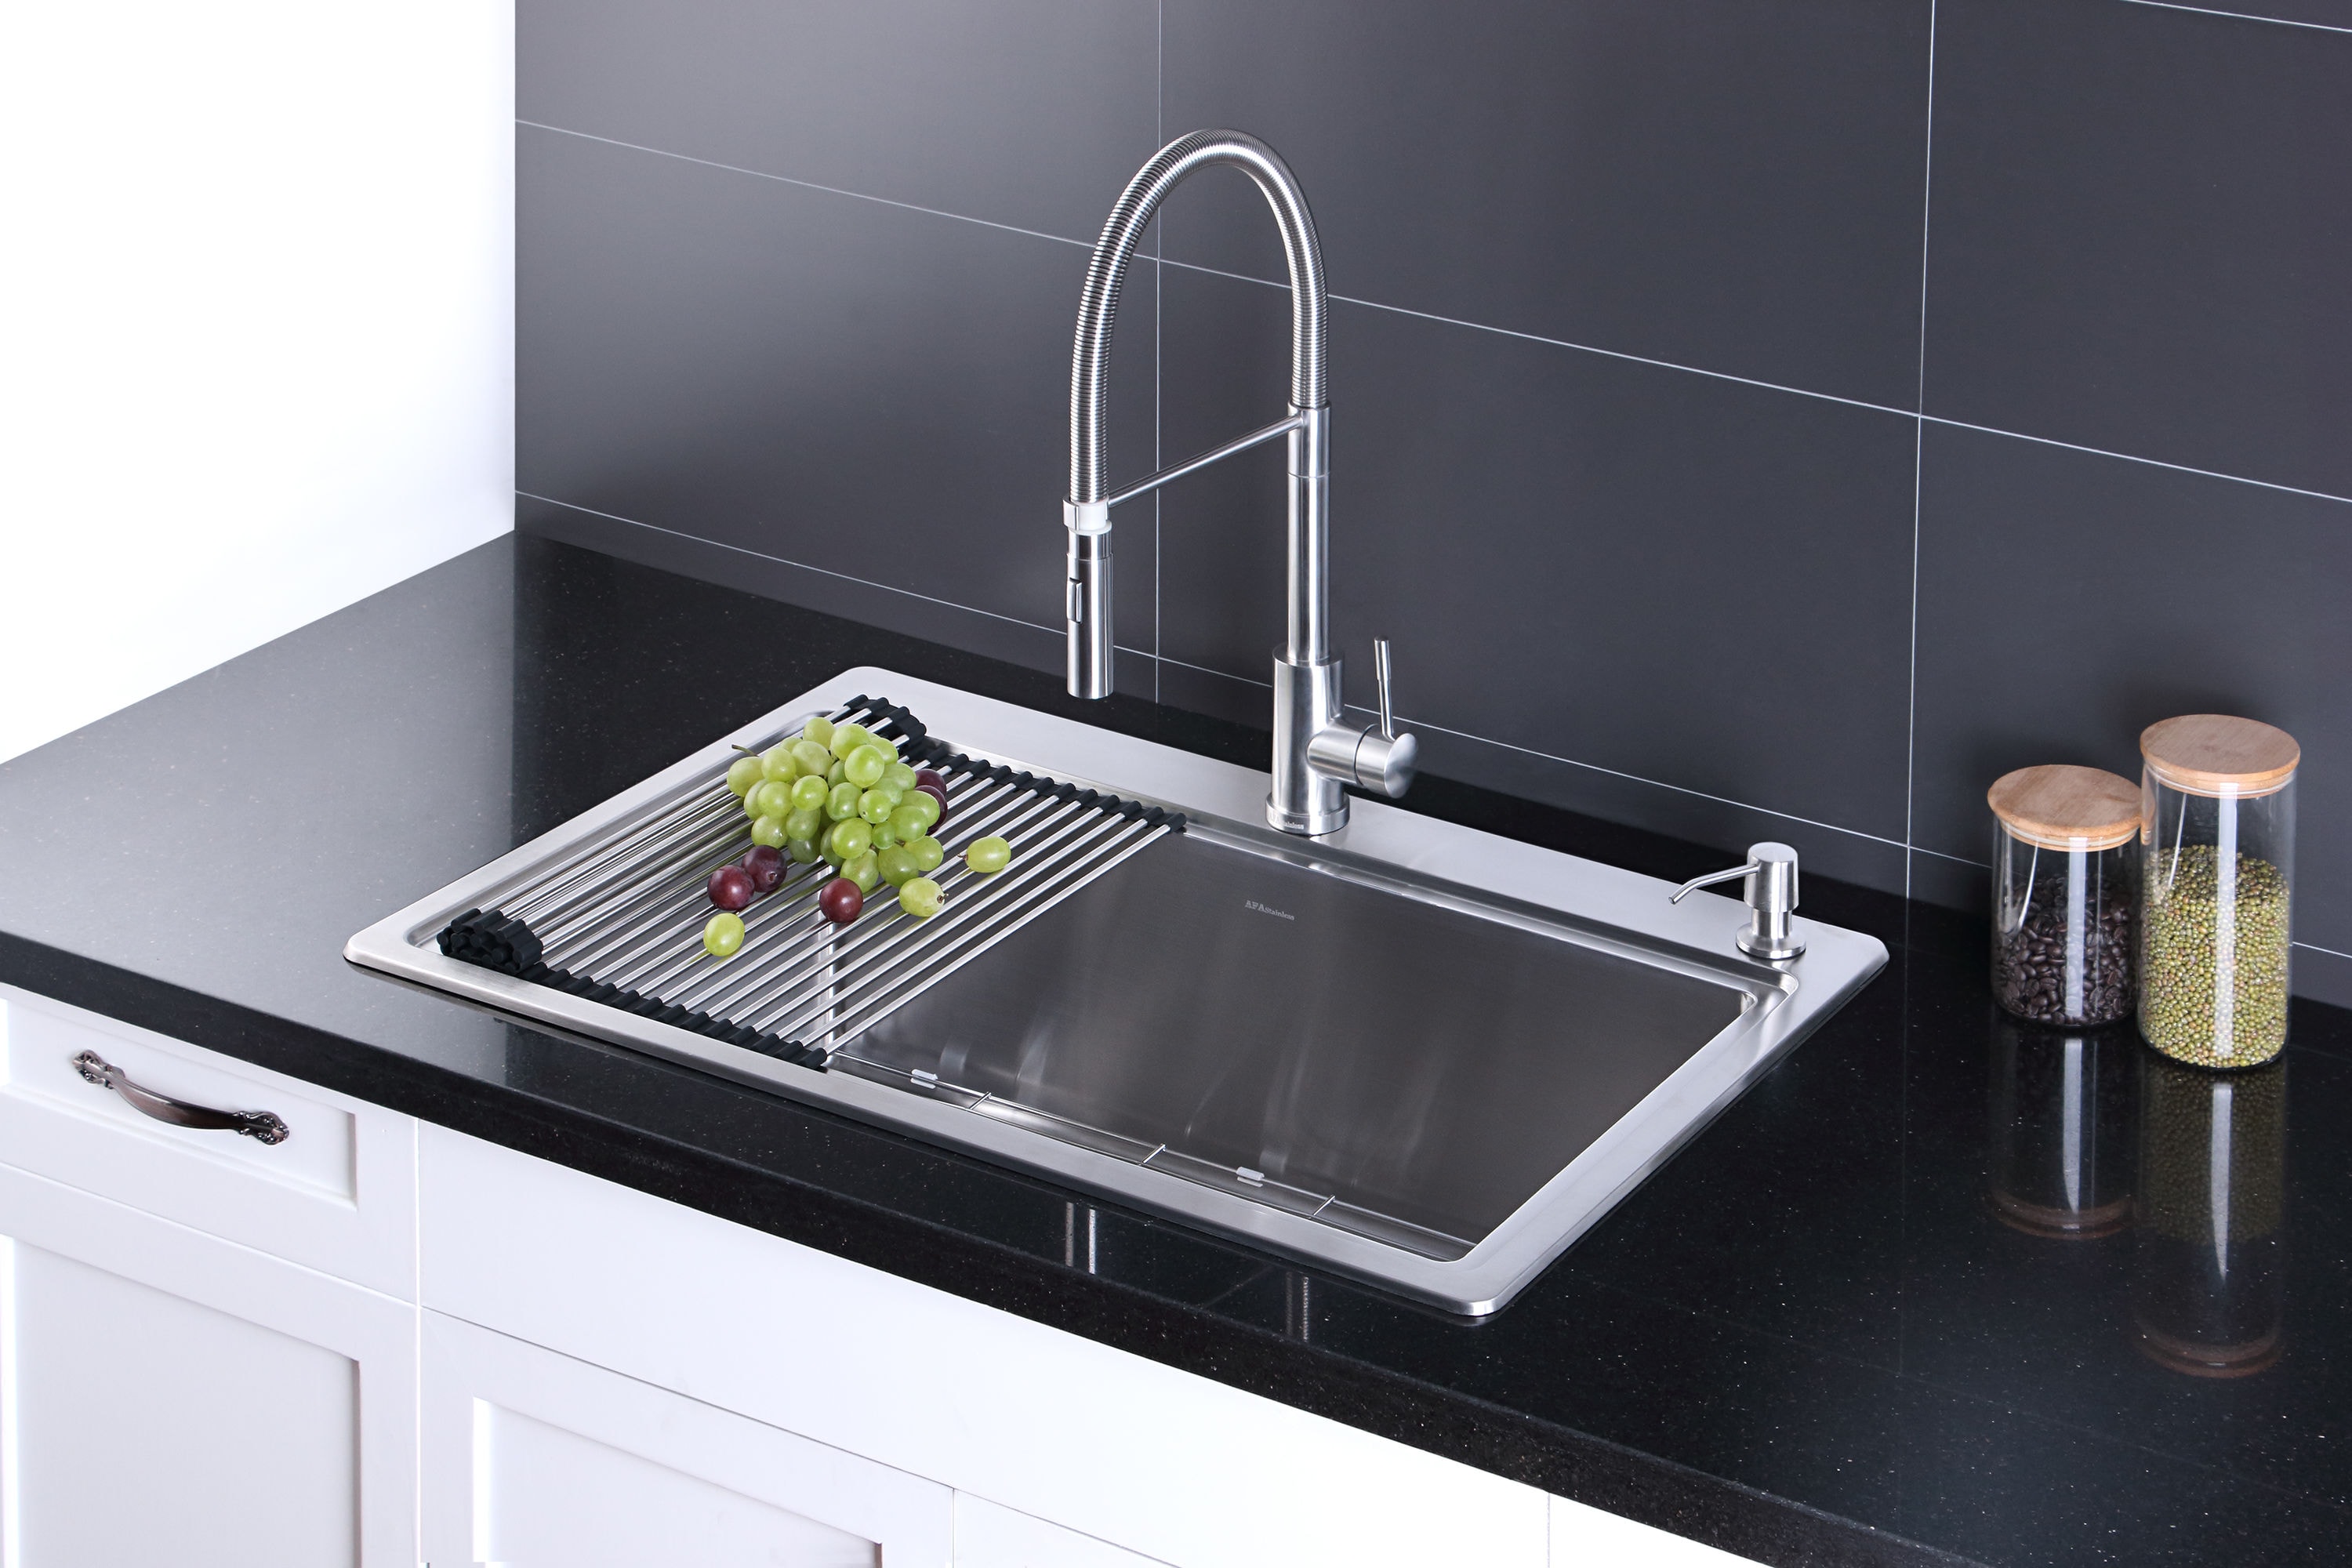 afa stainless 33 kitchen sink and pull down fauc